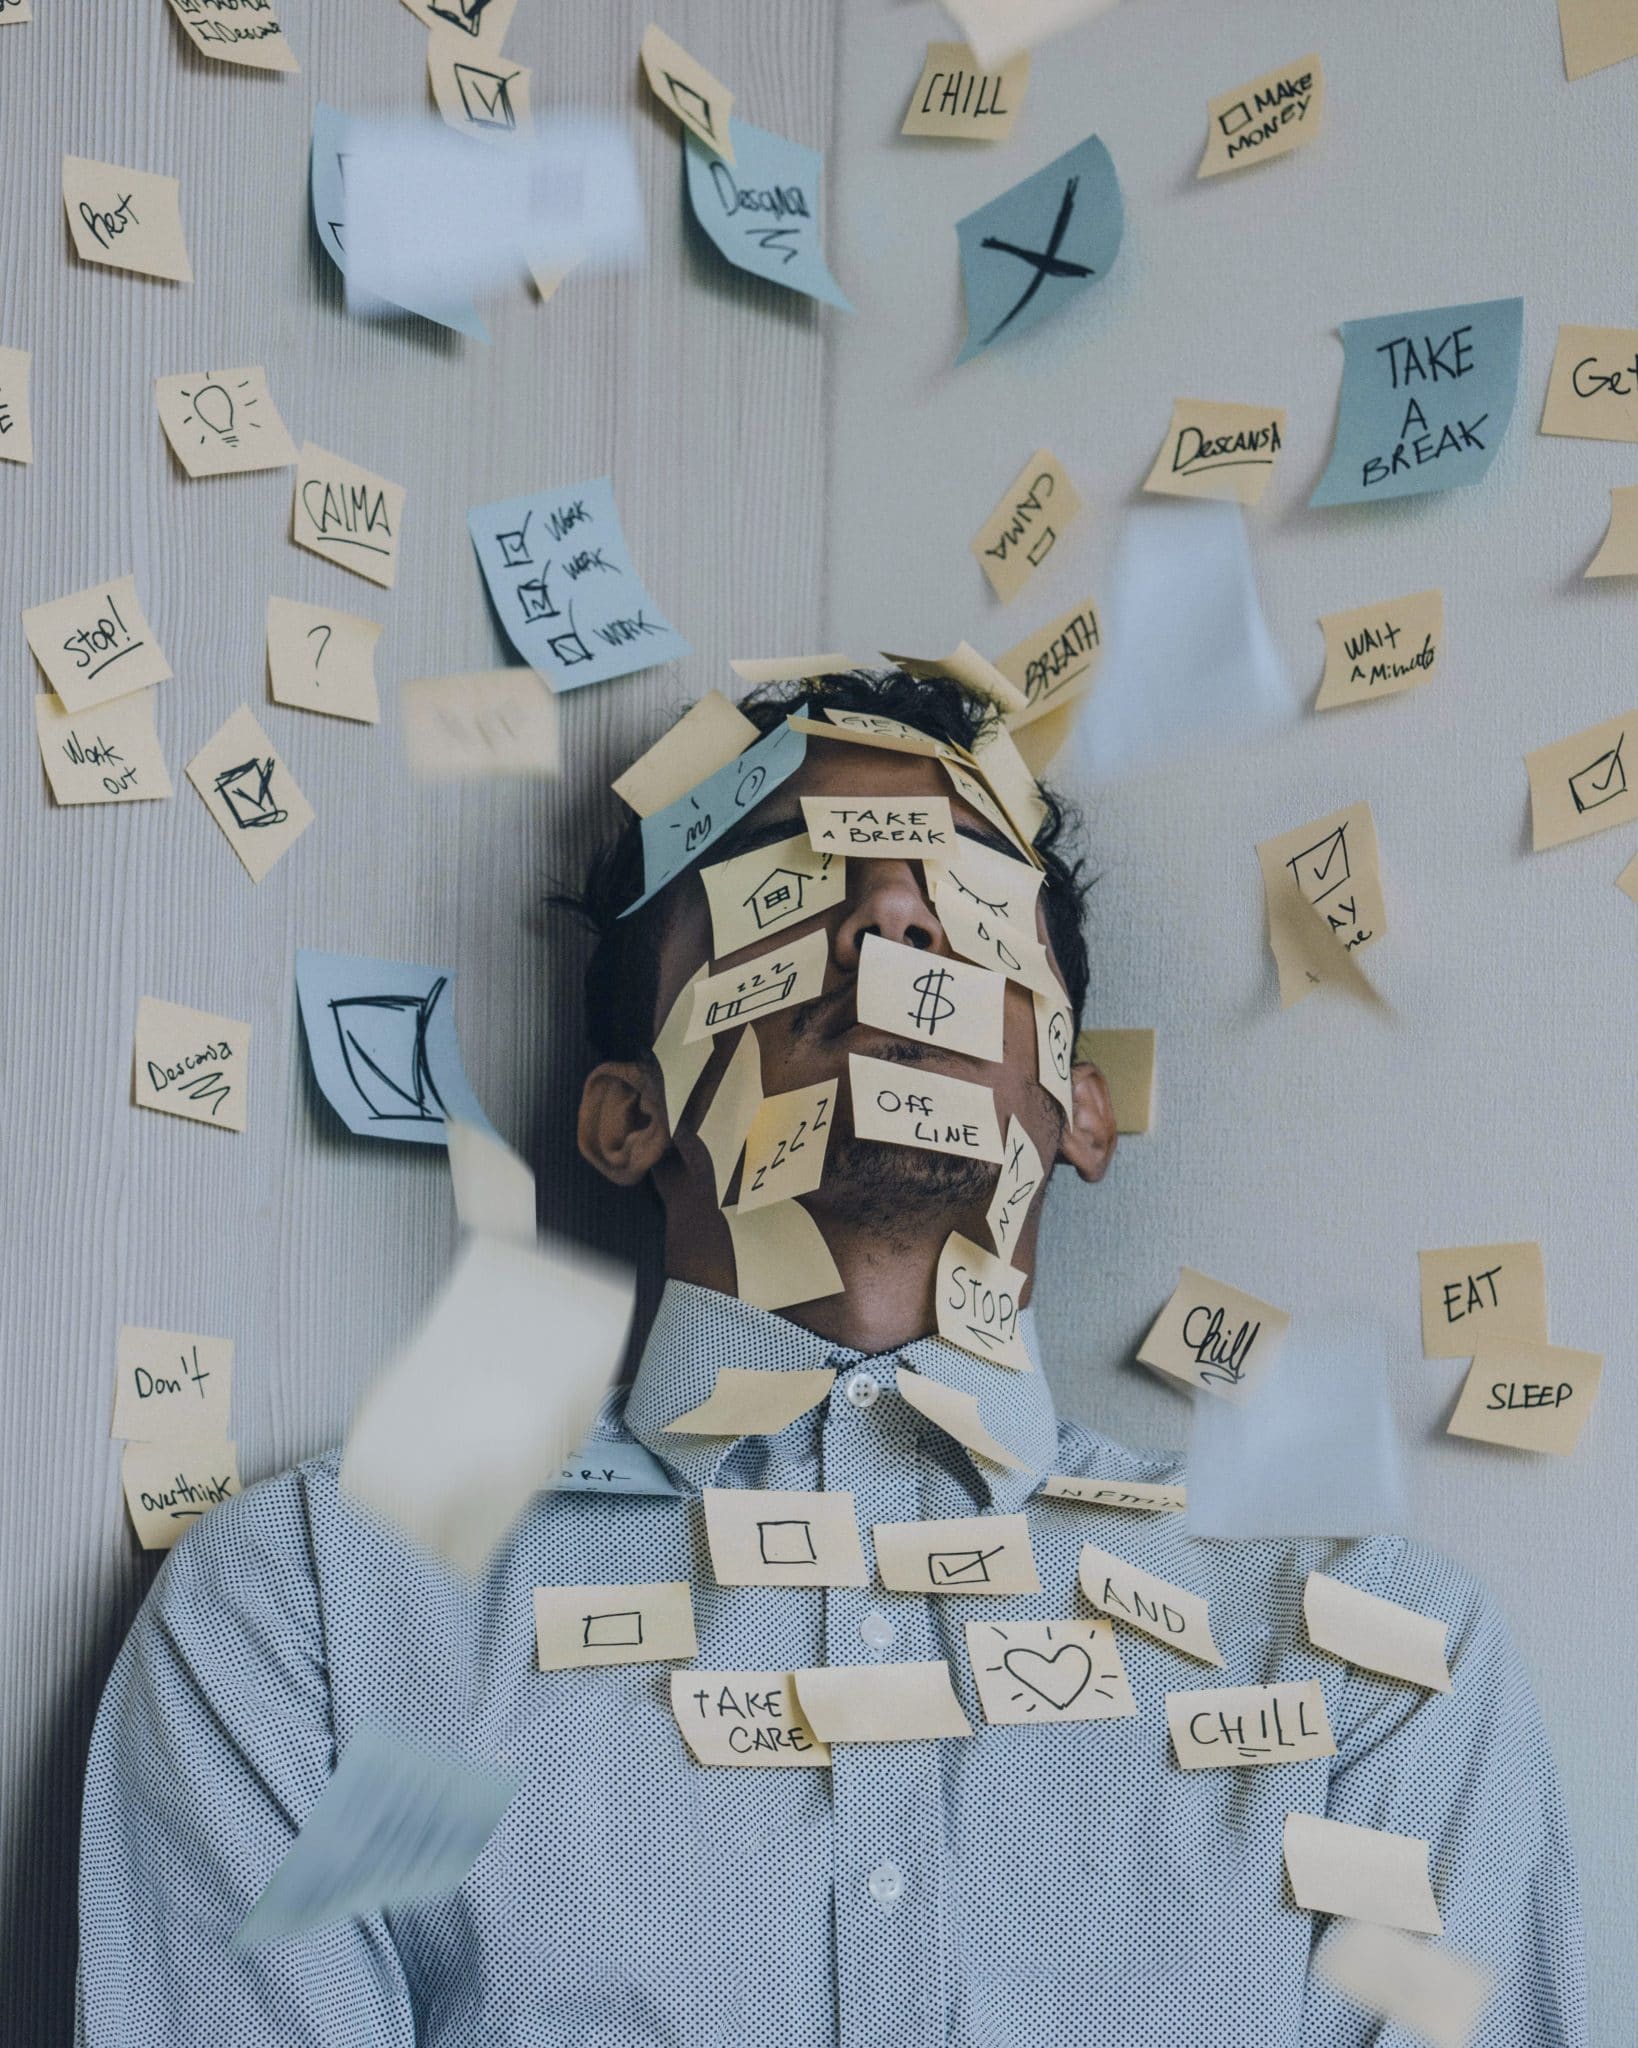 Man with anxiety and burnout leaning against wall, with countless sticky notes covering his face, shirt, and background